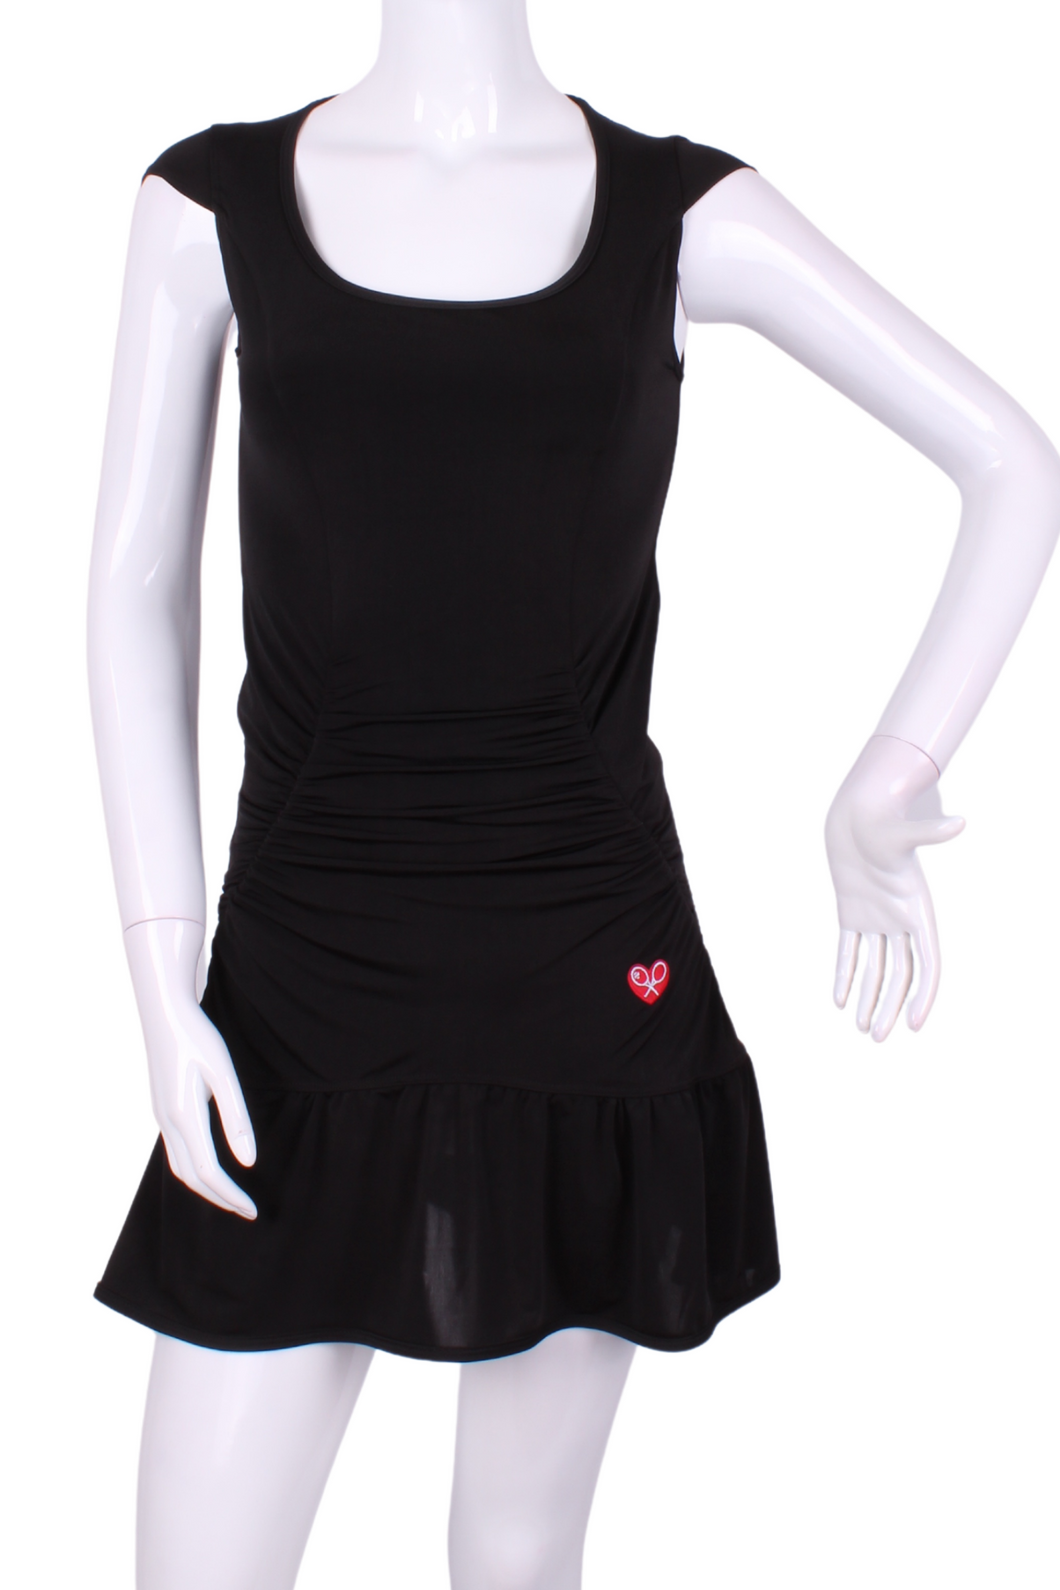 The Black Monroe Tennis Dress With Ruching - I LOVE MY DOUBLES PARTNER!!!